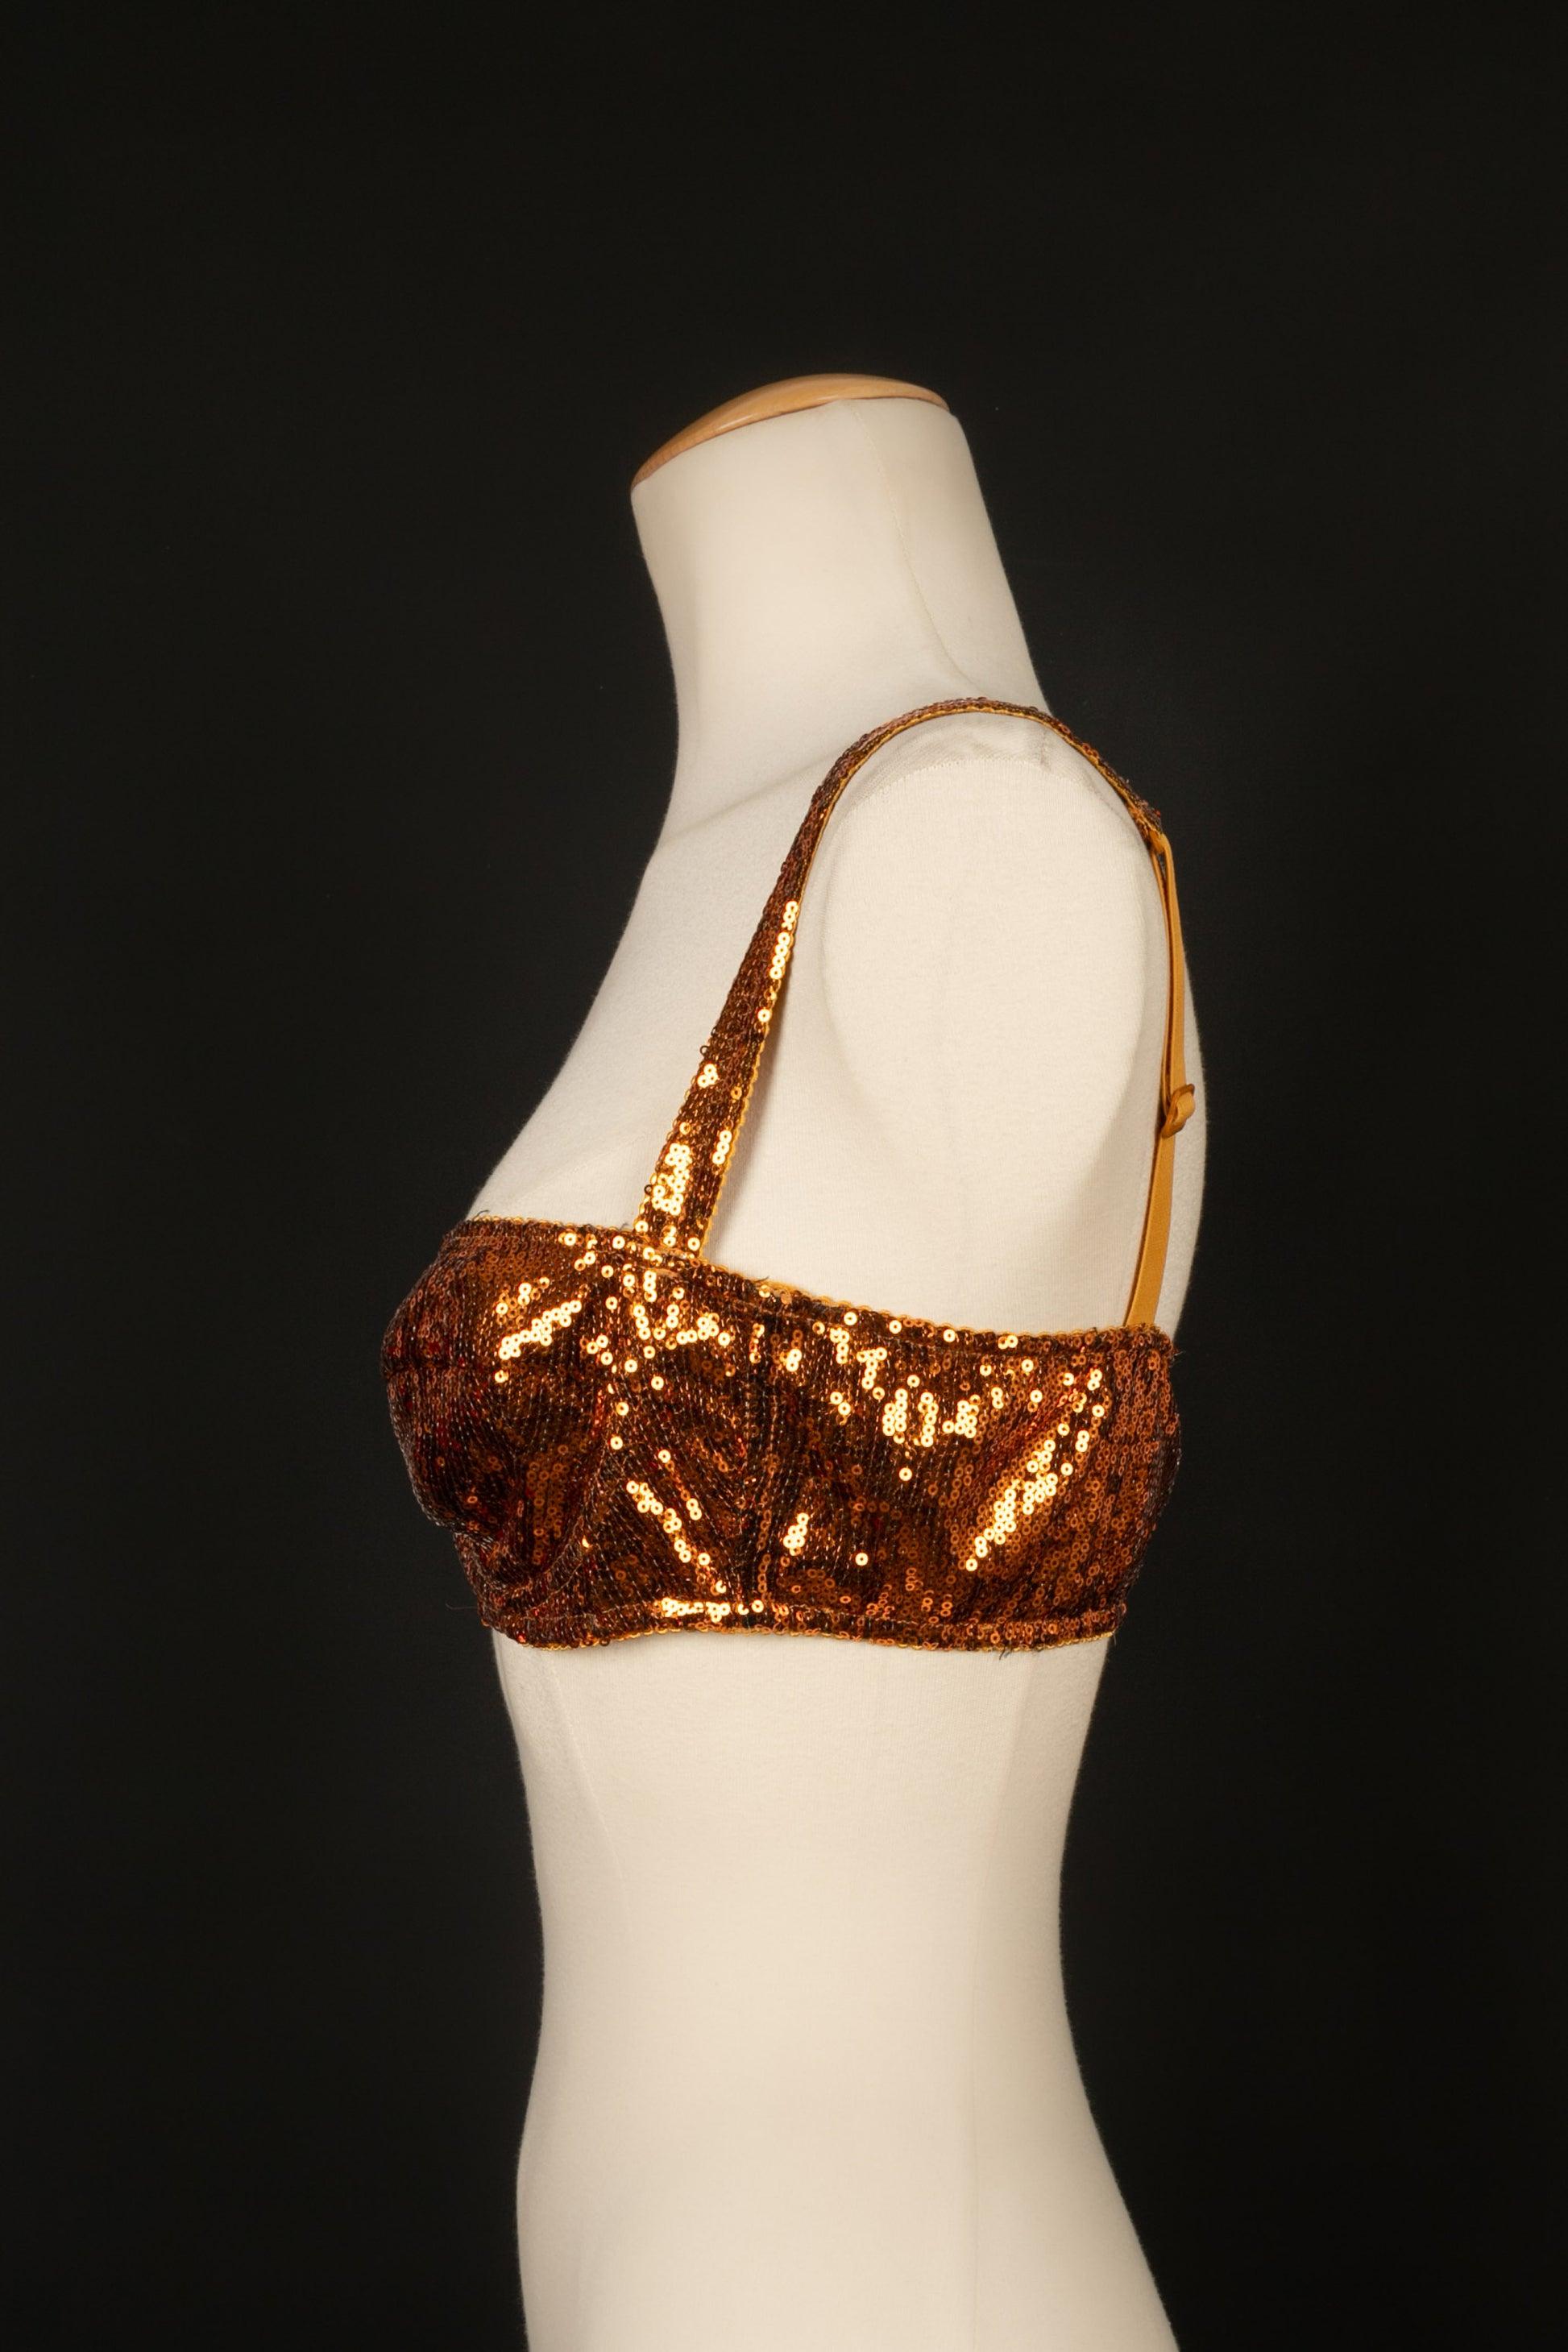 Dolce & Gabbana - (Made in Italy) Top entirely embroidered with orange sequins, and with a silk lining. Indicated size 80B EU.

Additional information:
Condition: Very good condition
Dimensions: Size 80B

Seller Reference: FH126
